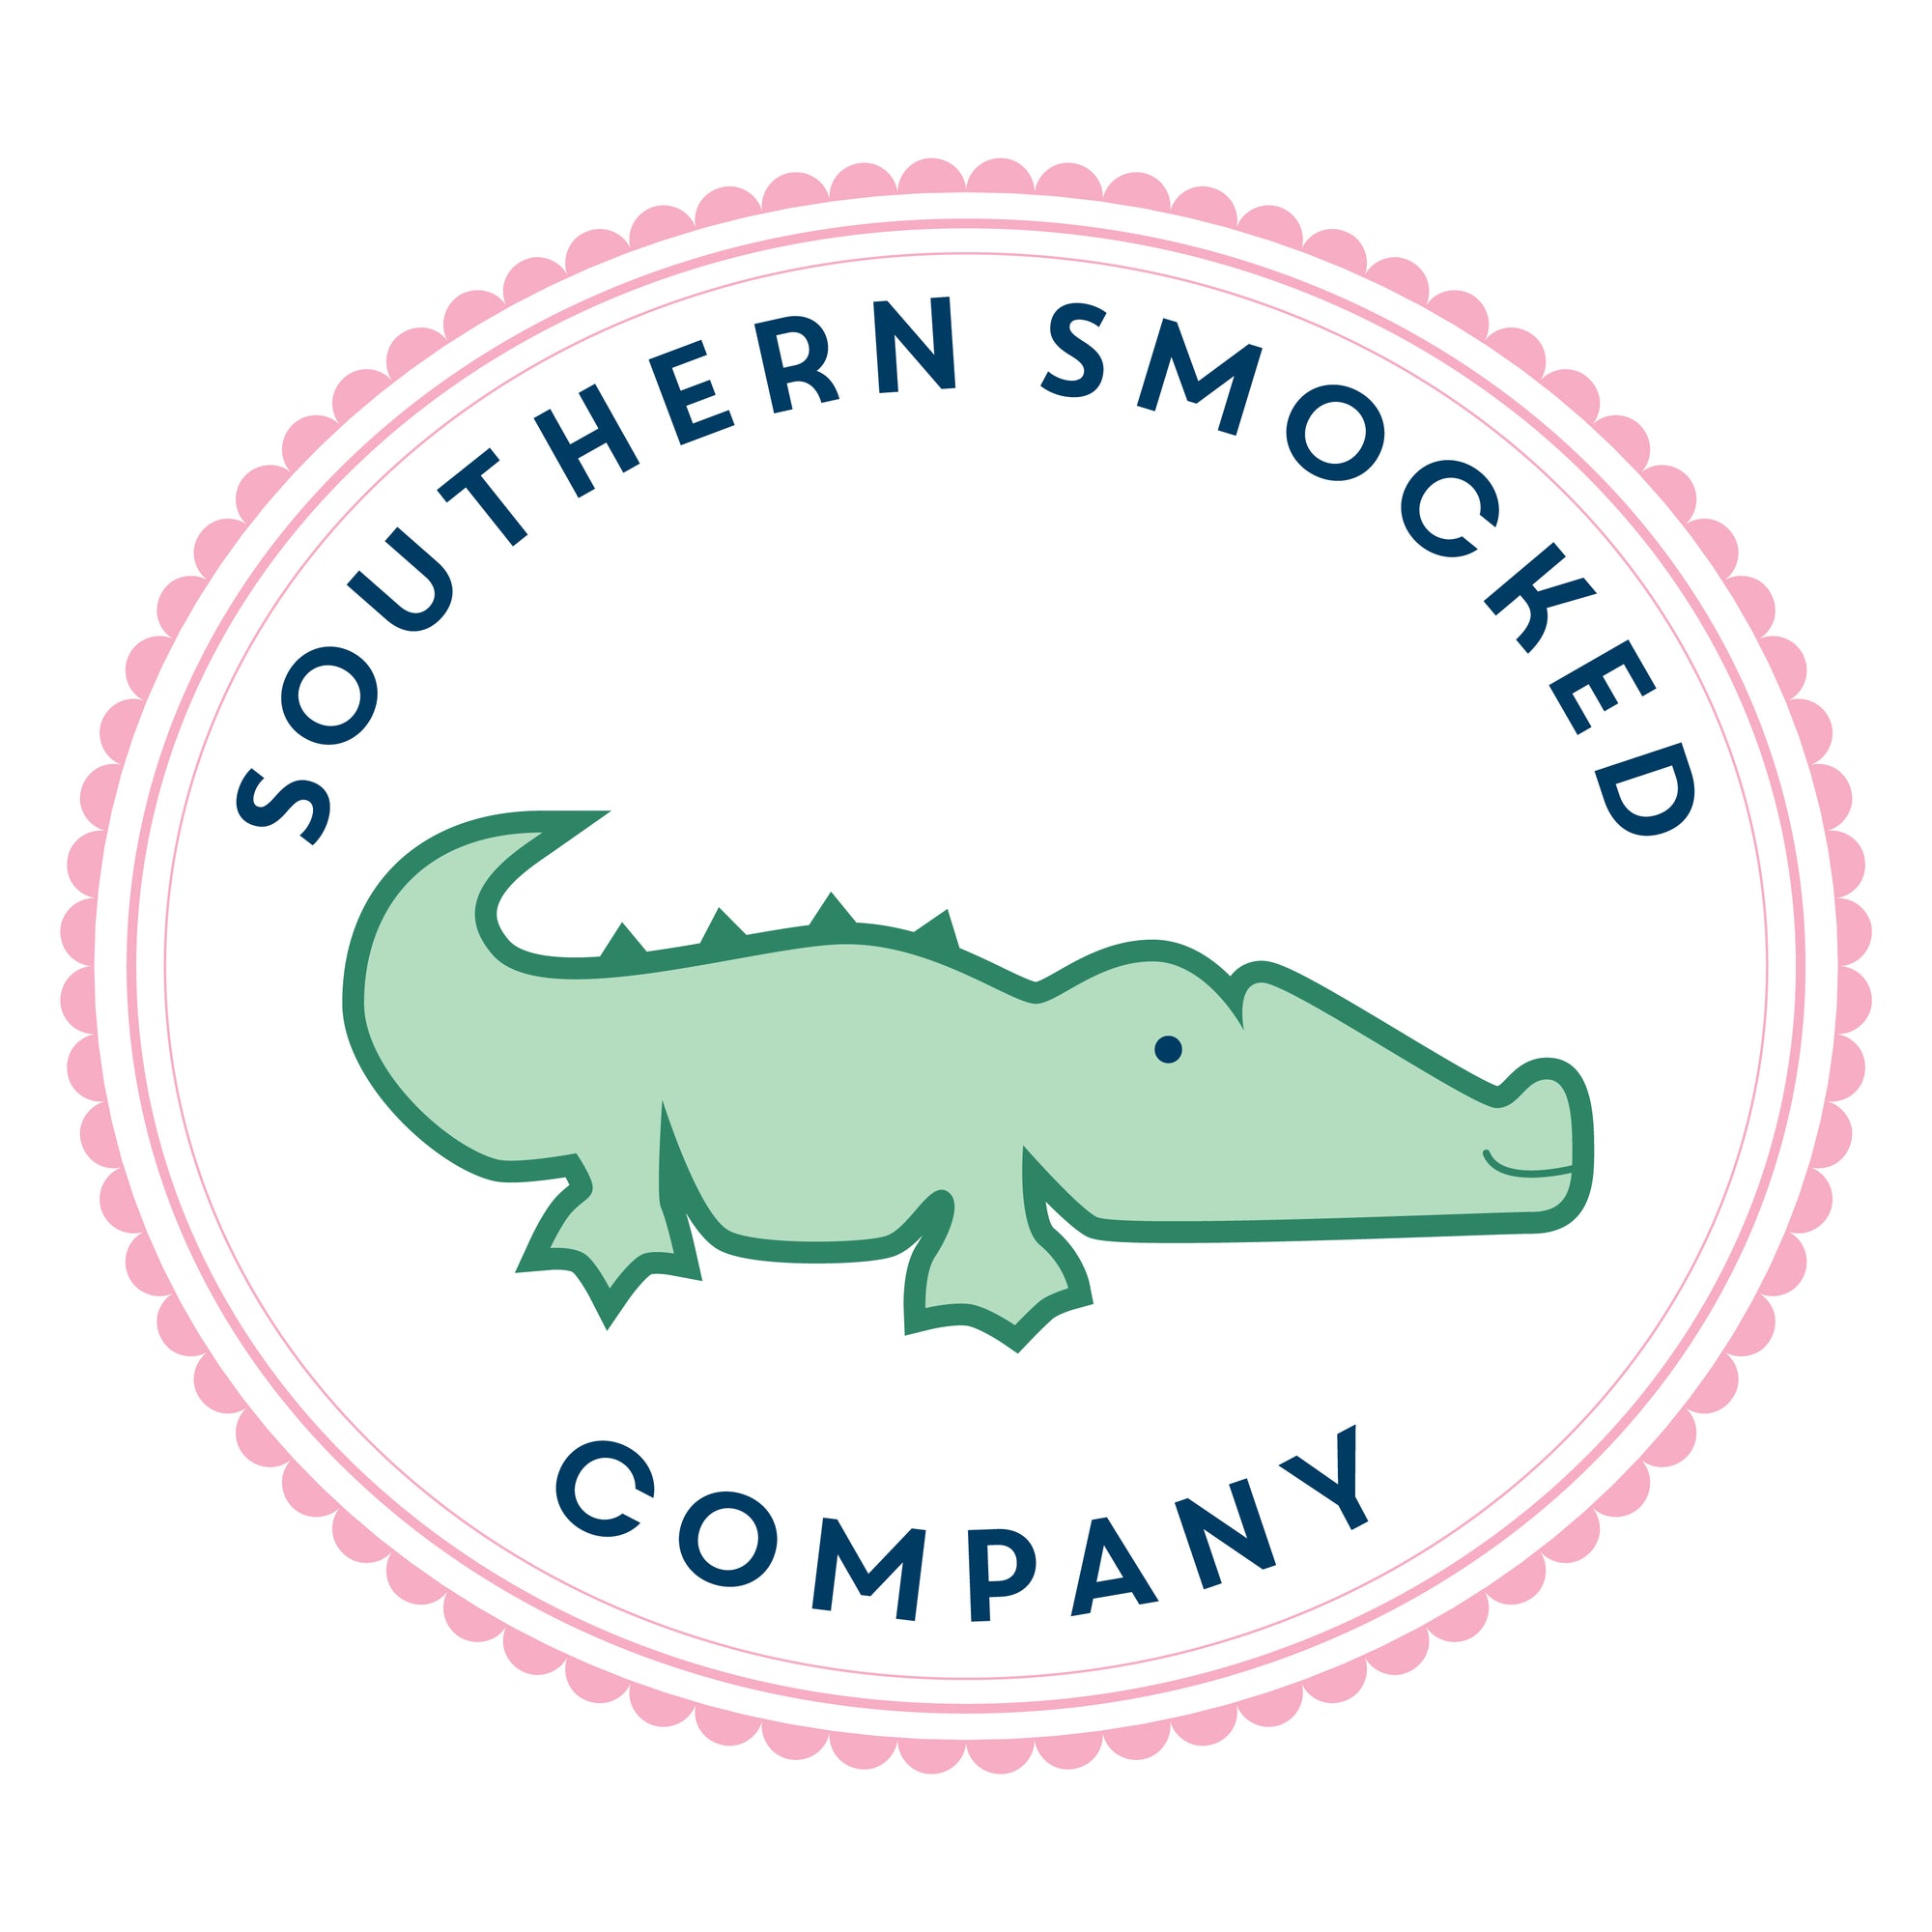 SOUTHERN SMOCKED CO. GIFT CARD - Southern Smocked Company | Great Deals On Classically Styled Smocked, Monogrammed, & Embroidered Infant, Toddler, & Children's Clothing